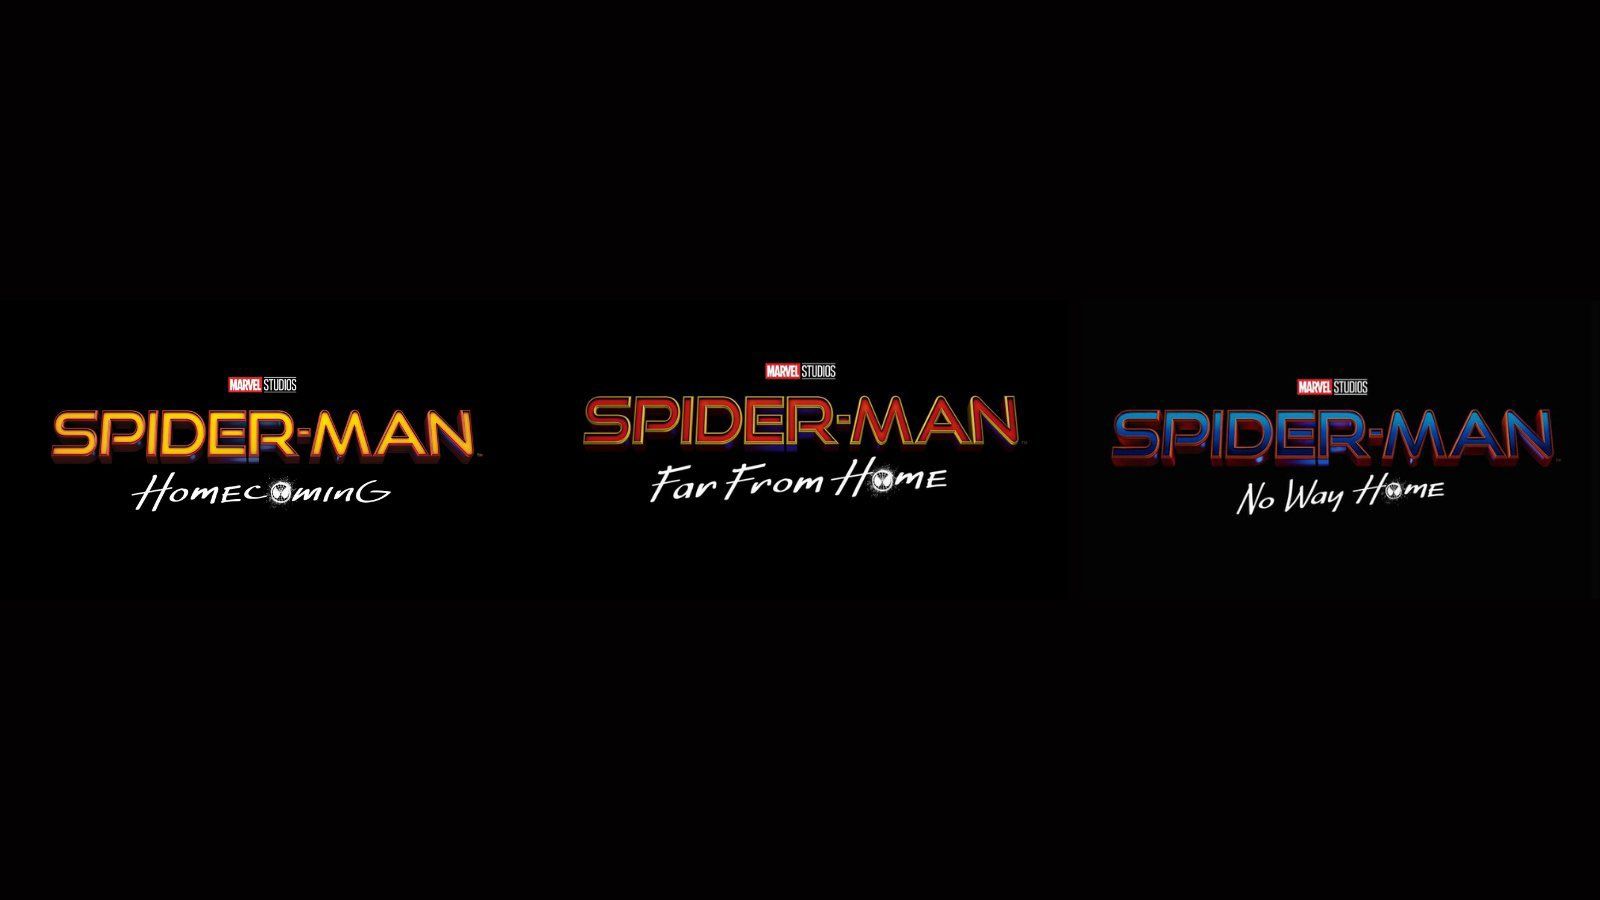 SPIDER MAN FULL MOVIE COLLECTION IN TAMIL